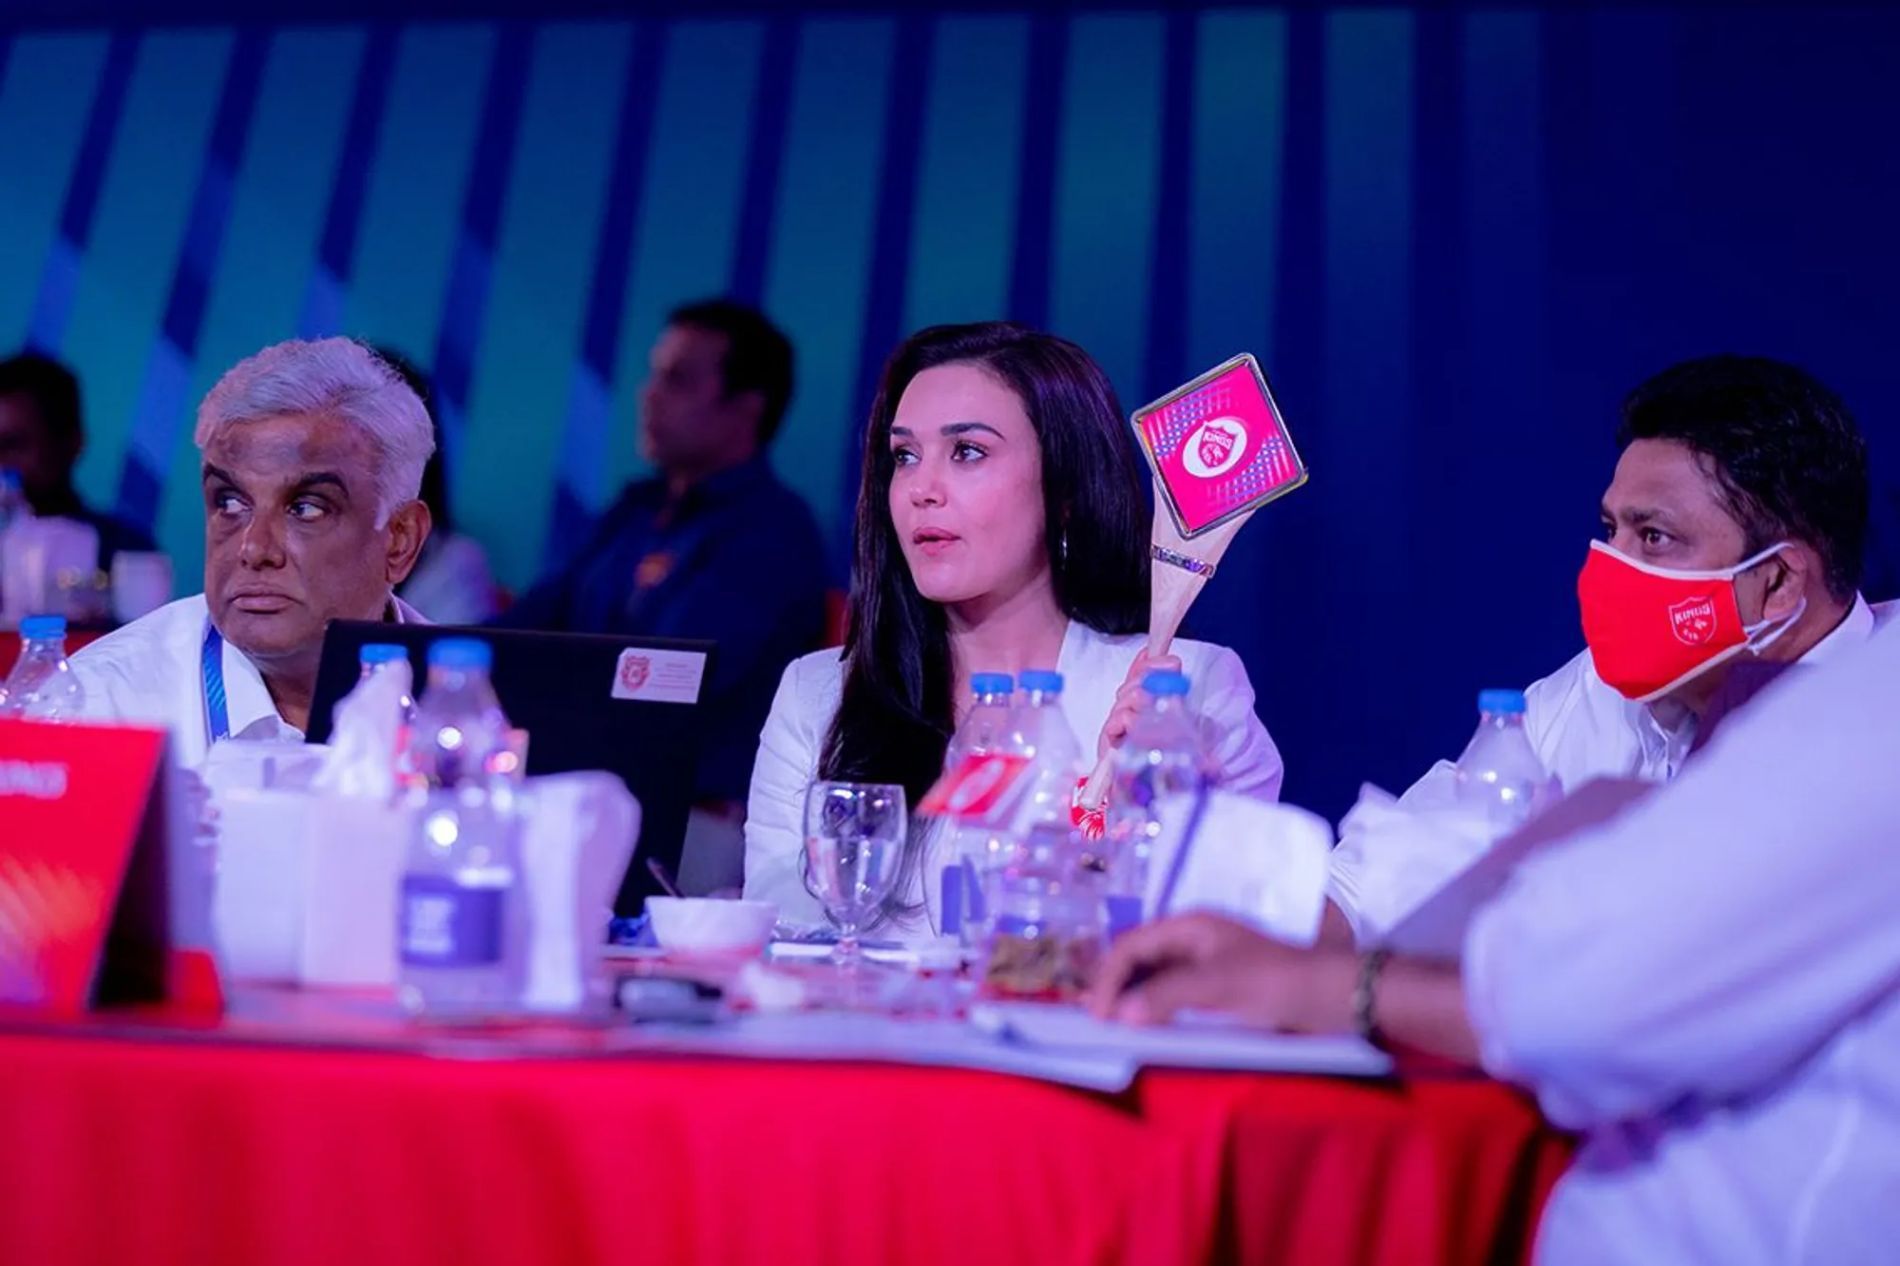 Preity Zinta (middle), co-owner of Punjab Kings (PBKS), during the IPL 2021 auction. Pic: IPLT20.COM